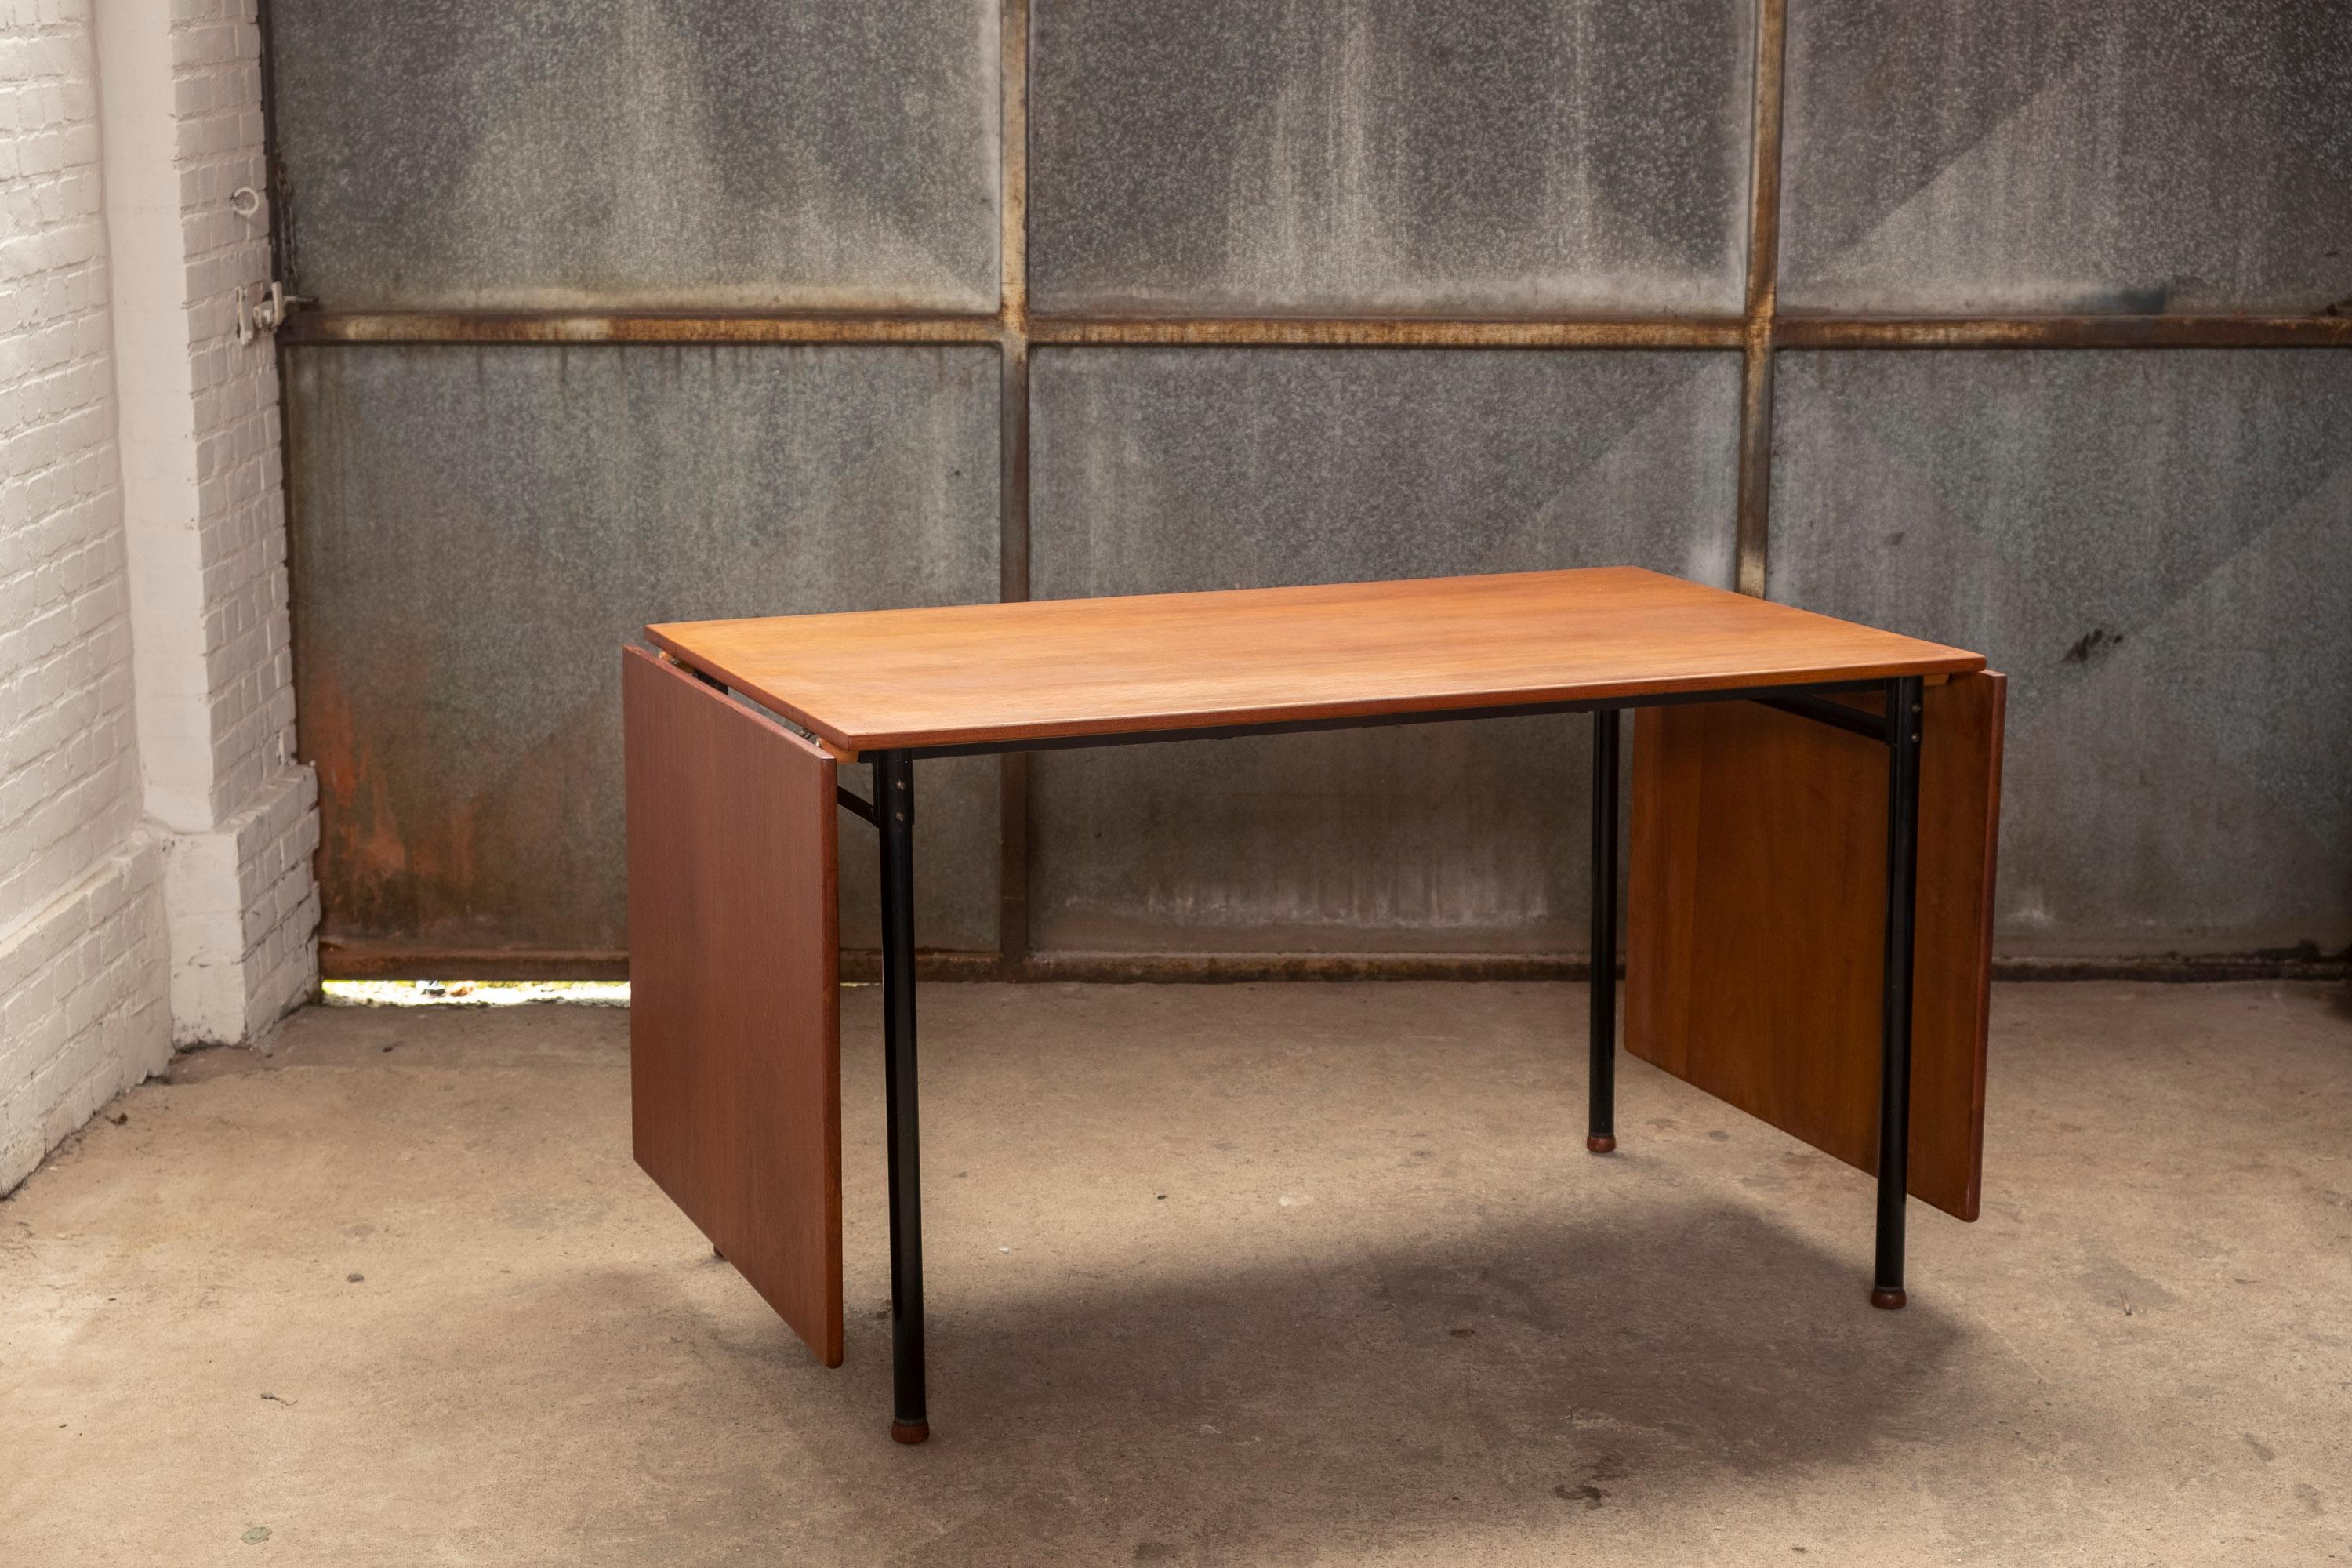 Beautiful folding table in teak, probably made to order or custom made in the 1960s in Odense, Denmark. The table is elegant in its functional design and details such as the footboards turned in teak and the end of the pull-out system covered in